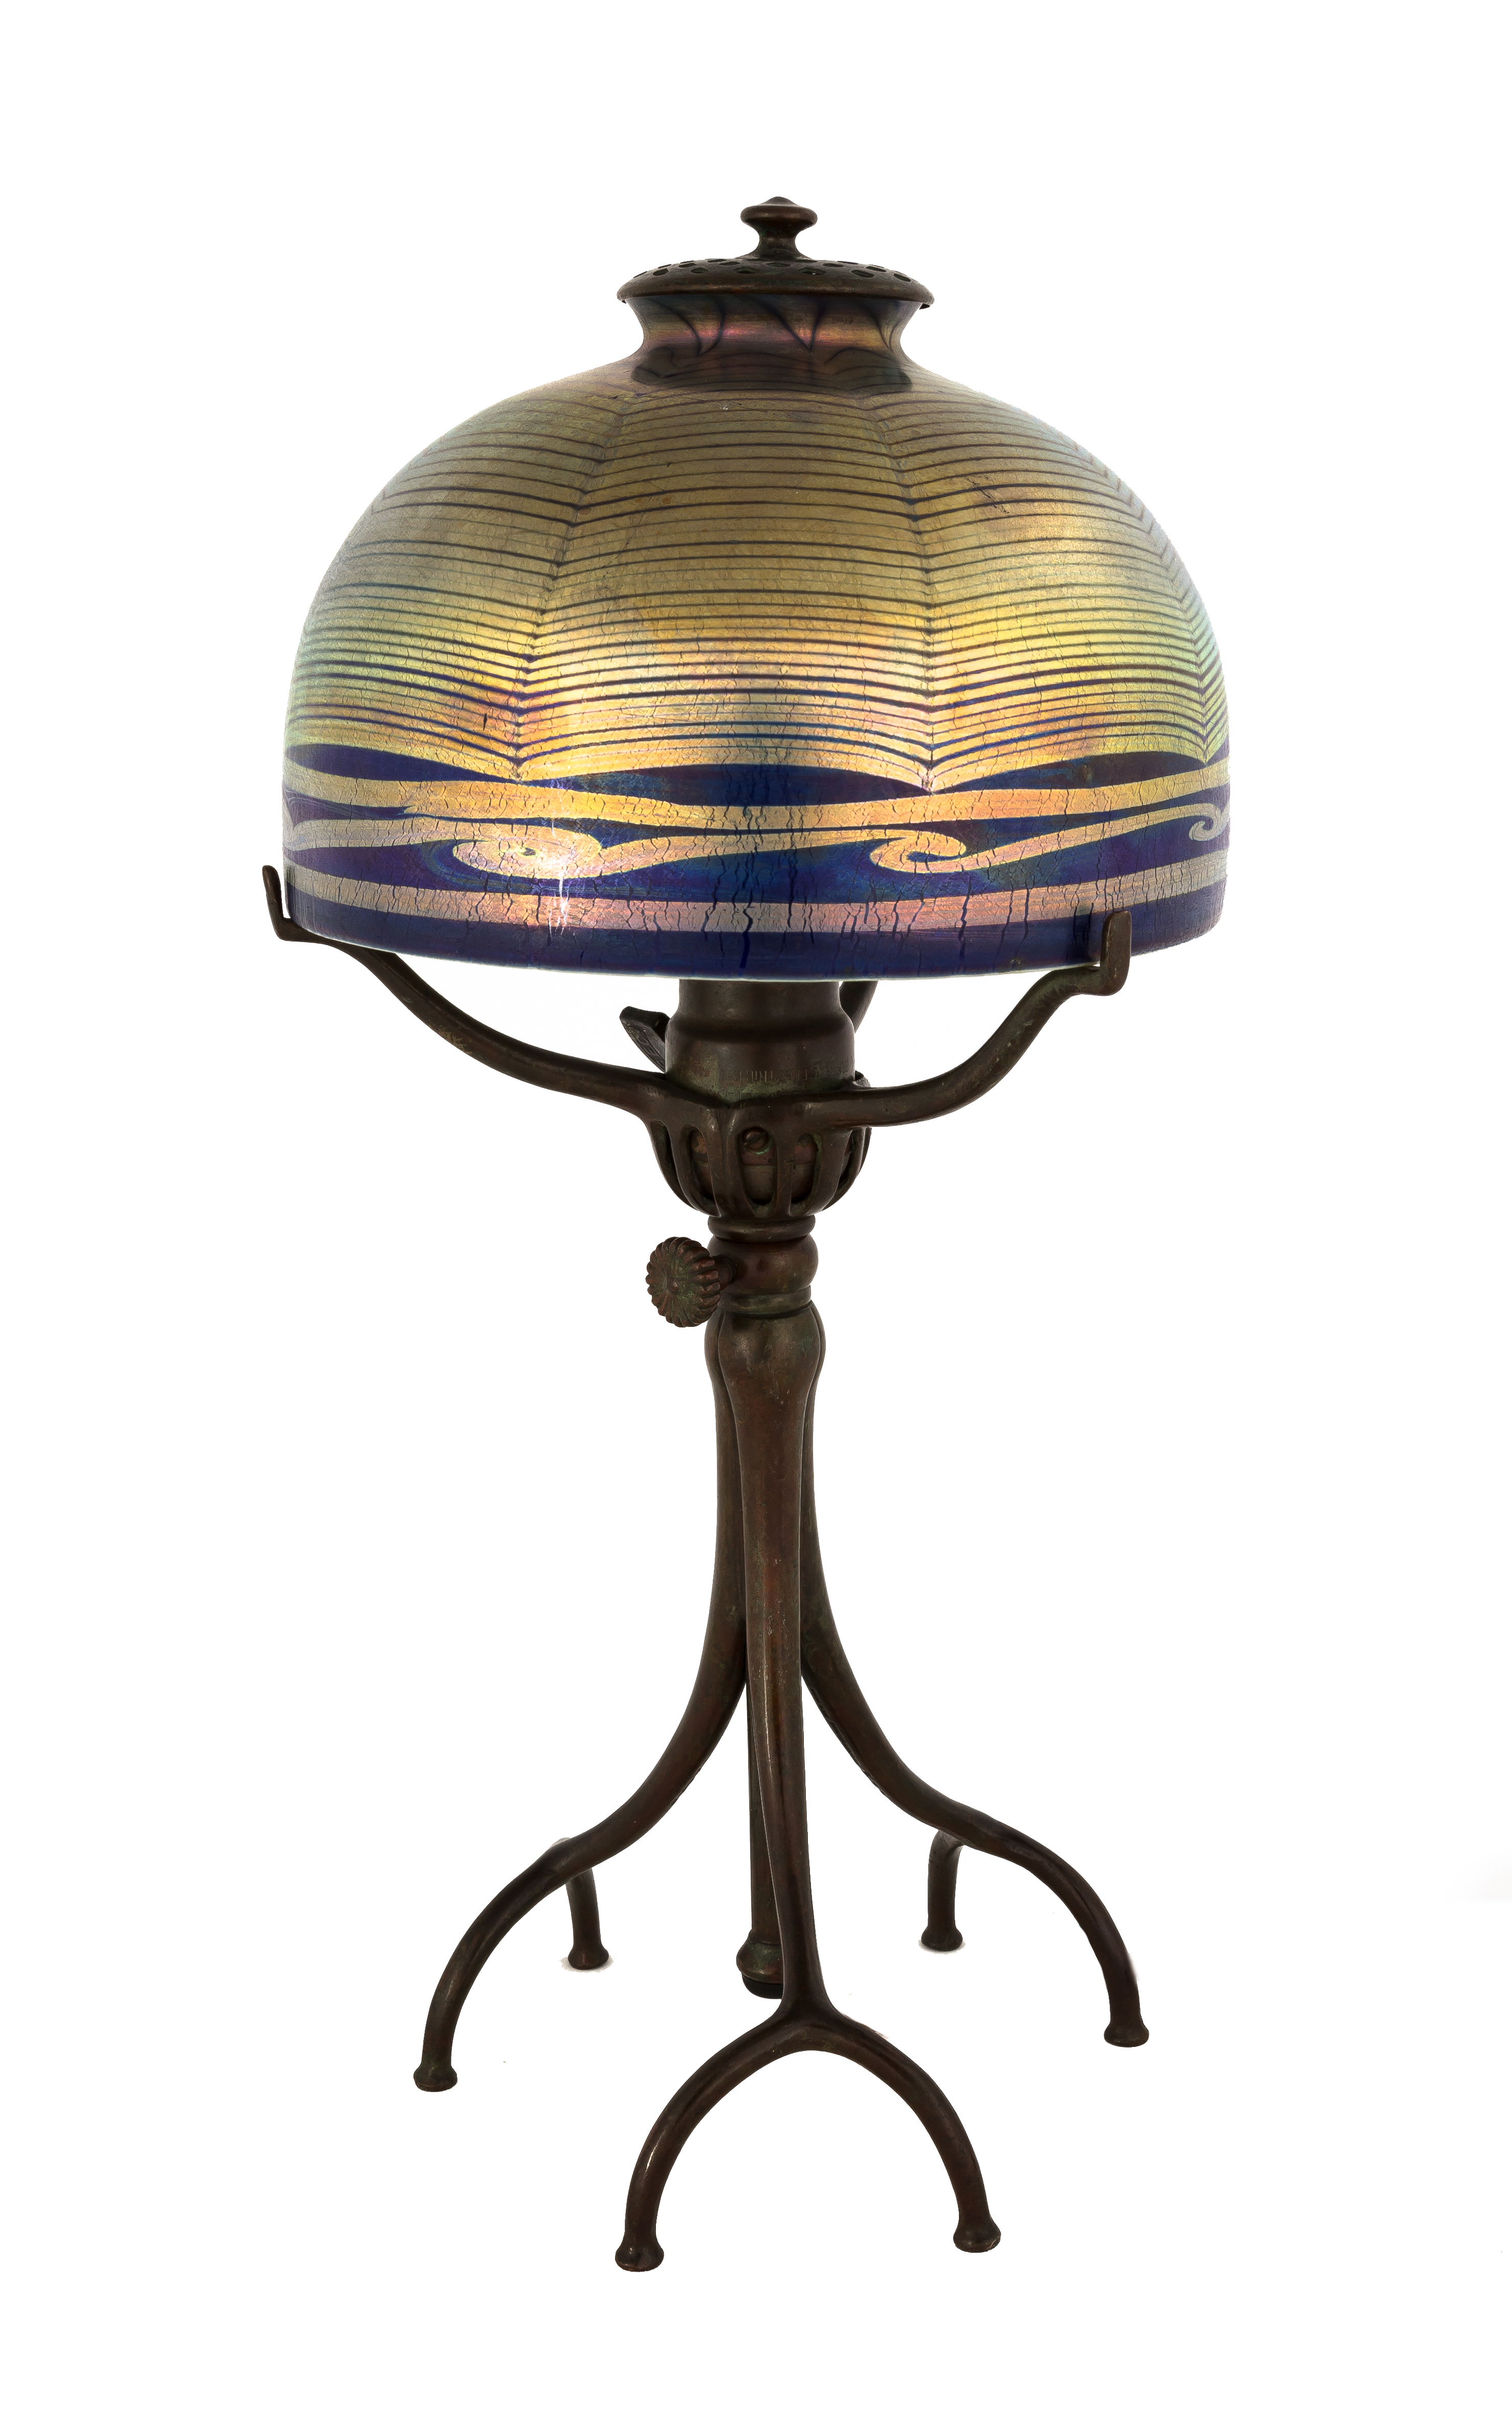 Tiffany Studios,NY, Blue Favrile Lamp with Spider Web Design. Favrile glass and patinated bronze